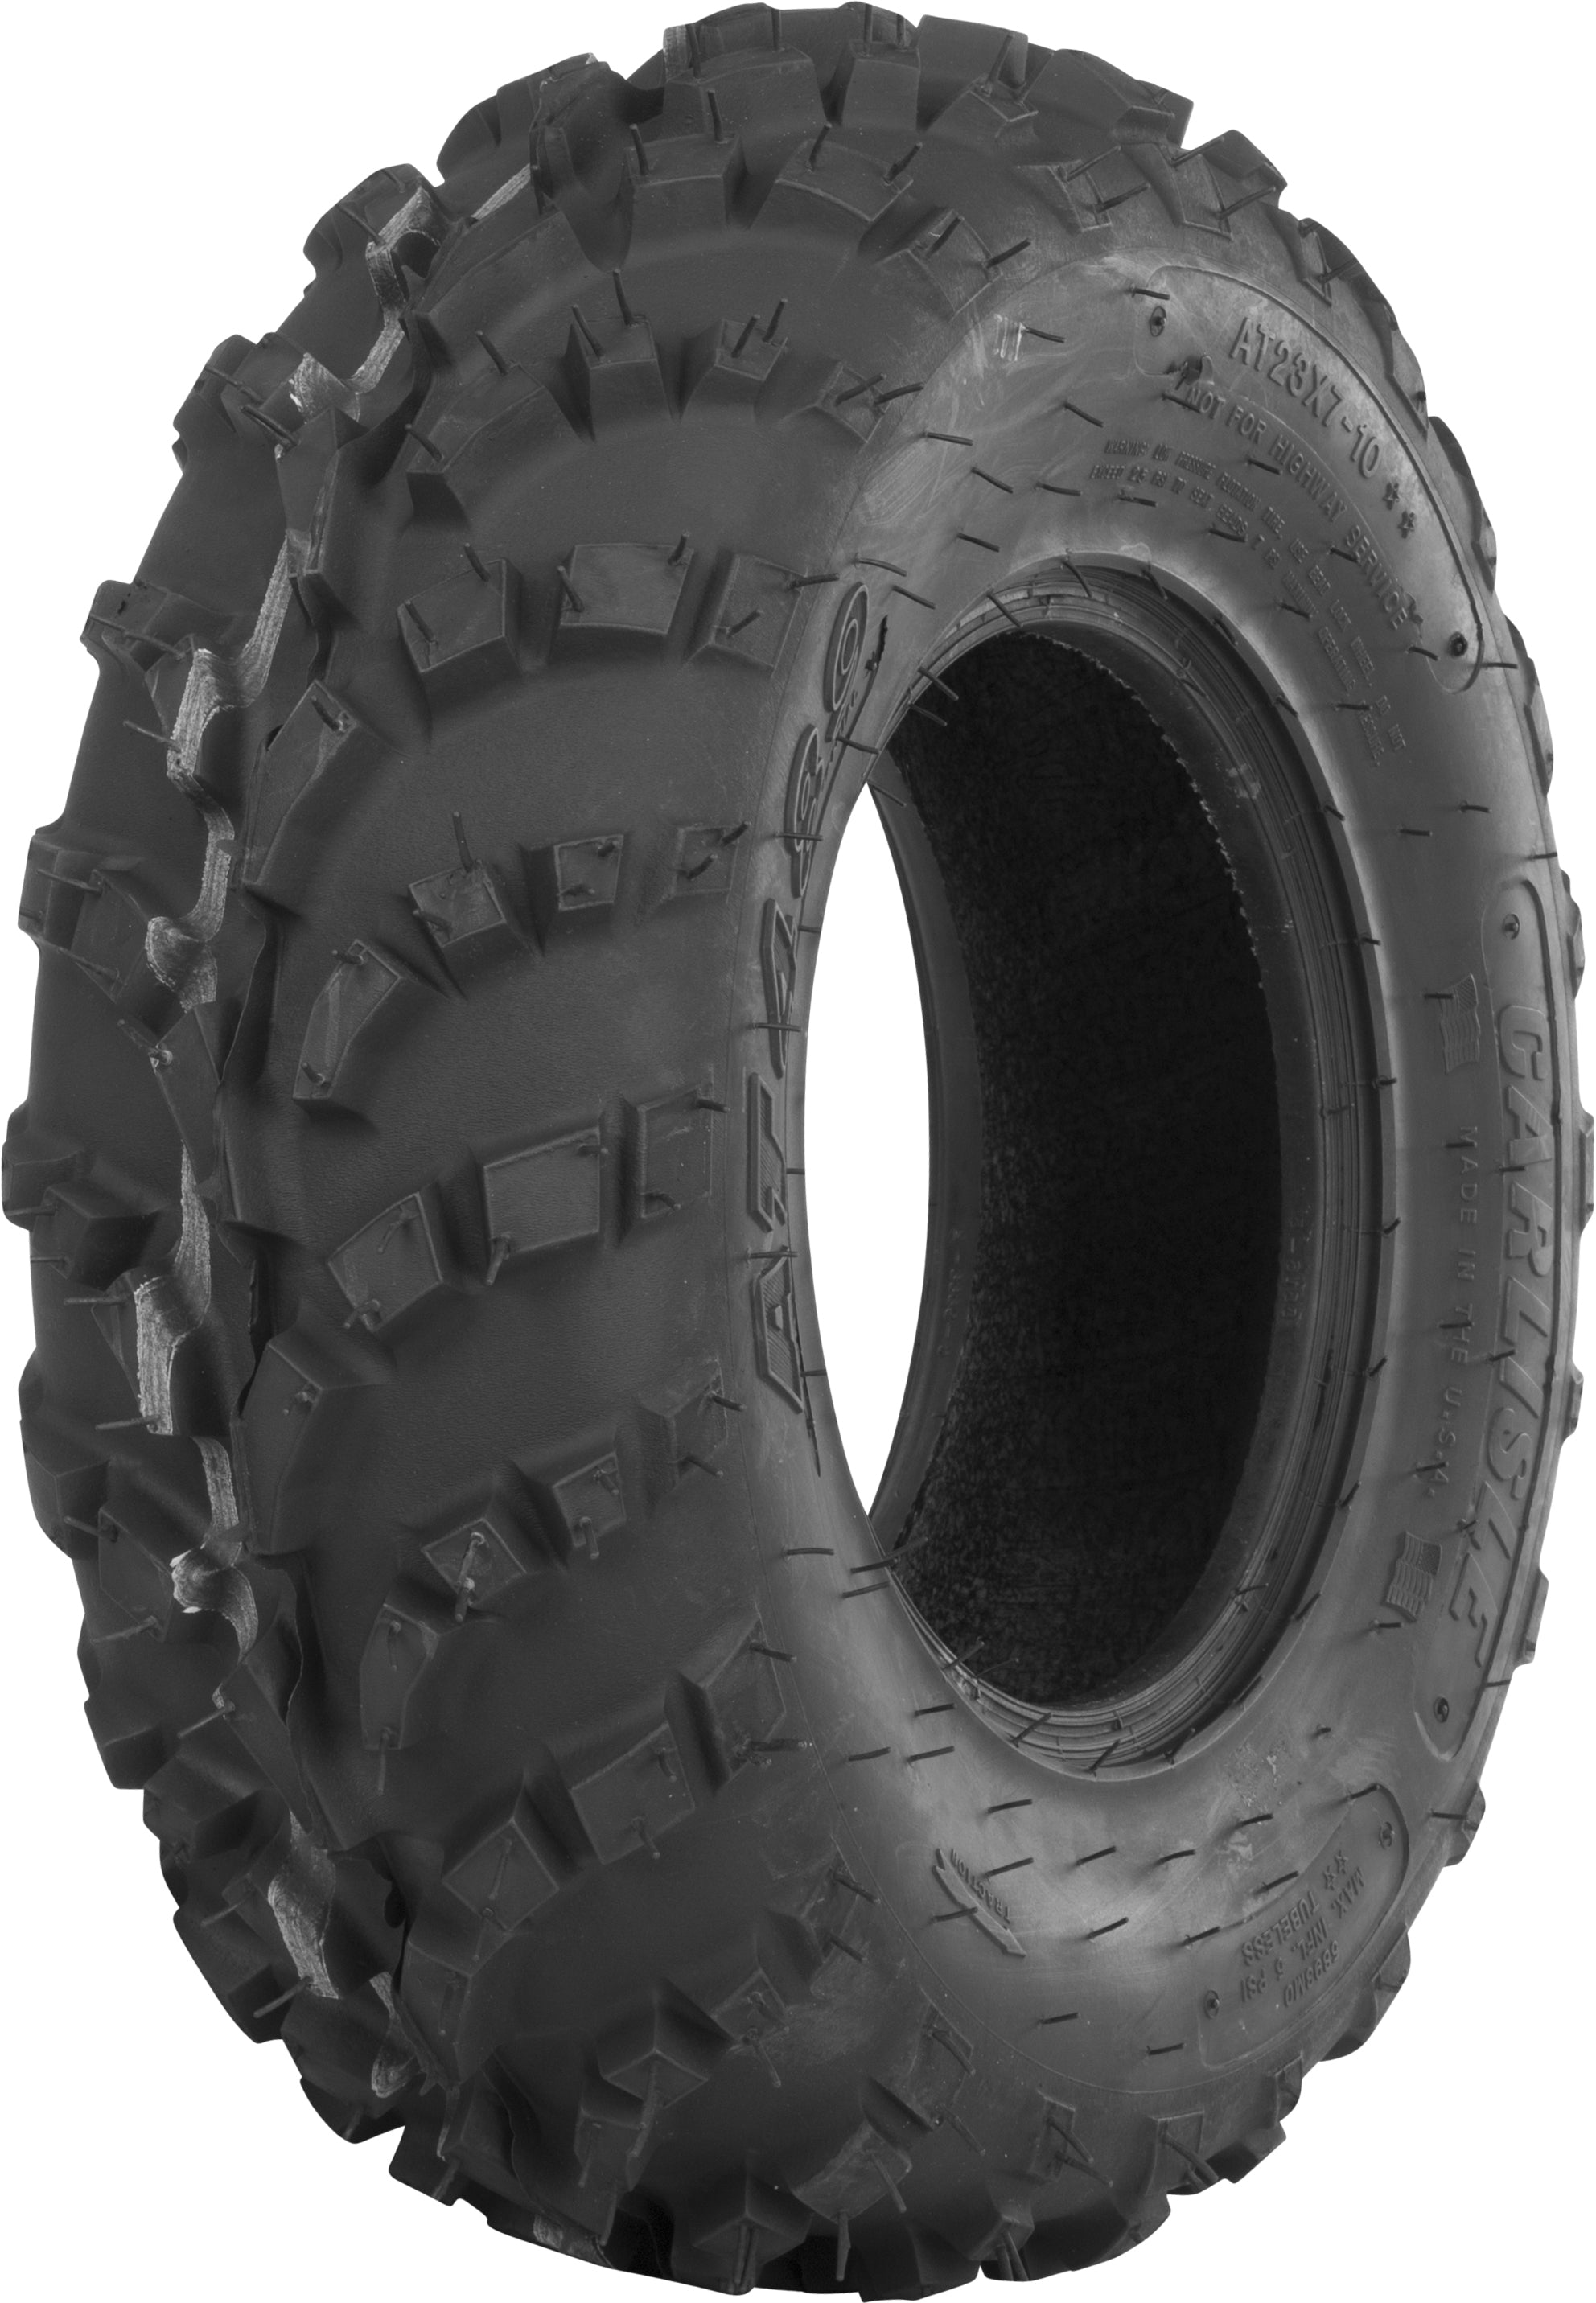 Tire At489 Front 23x8 12 Bias